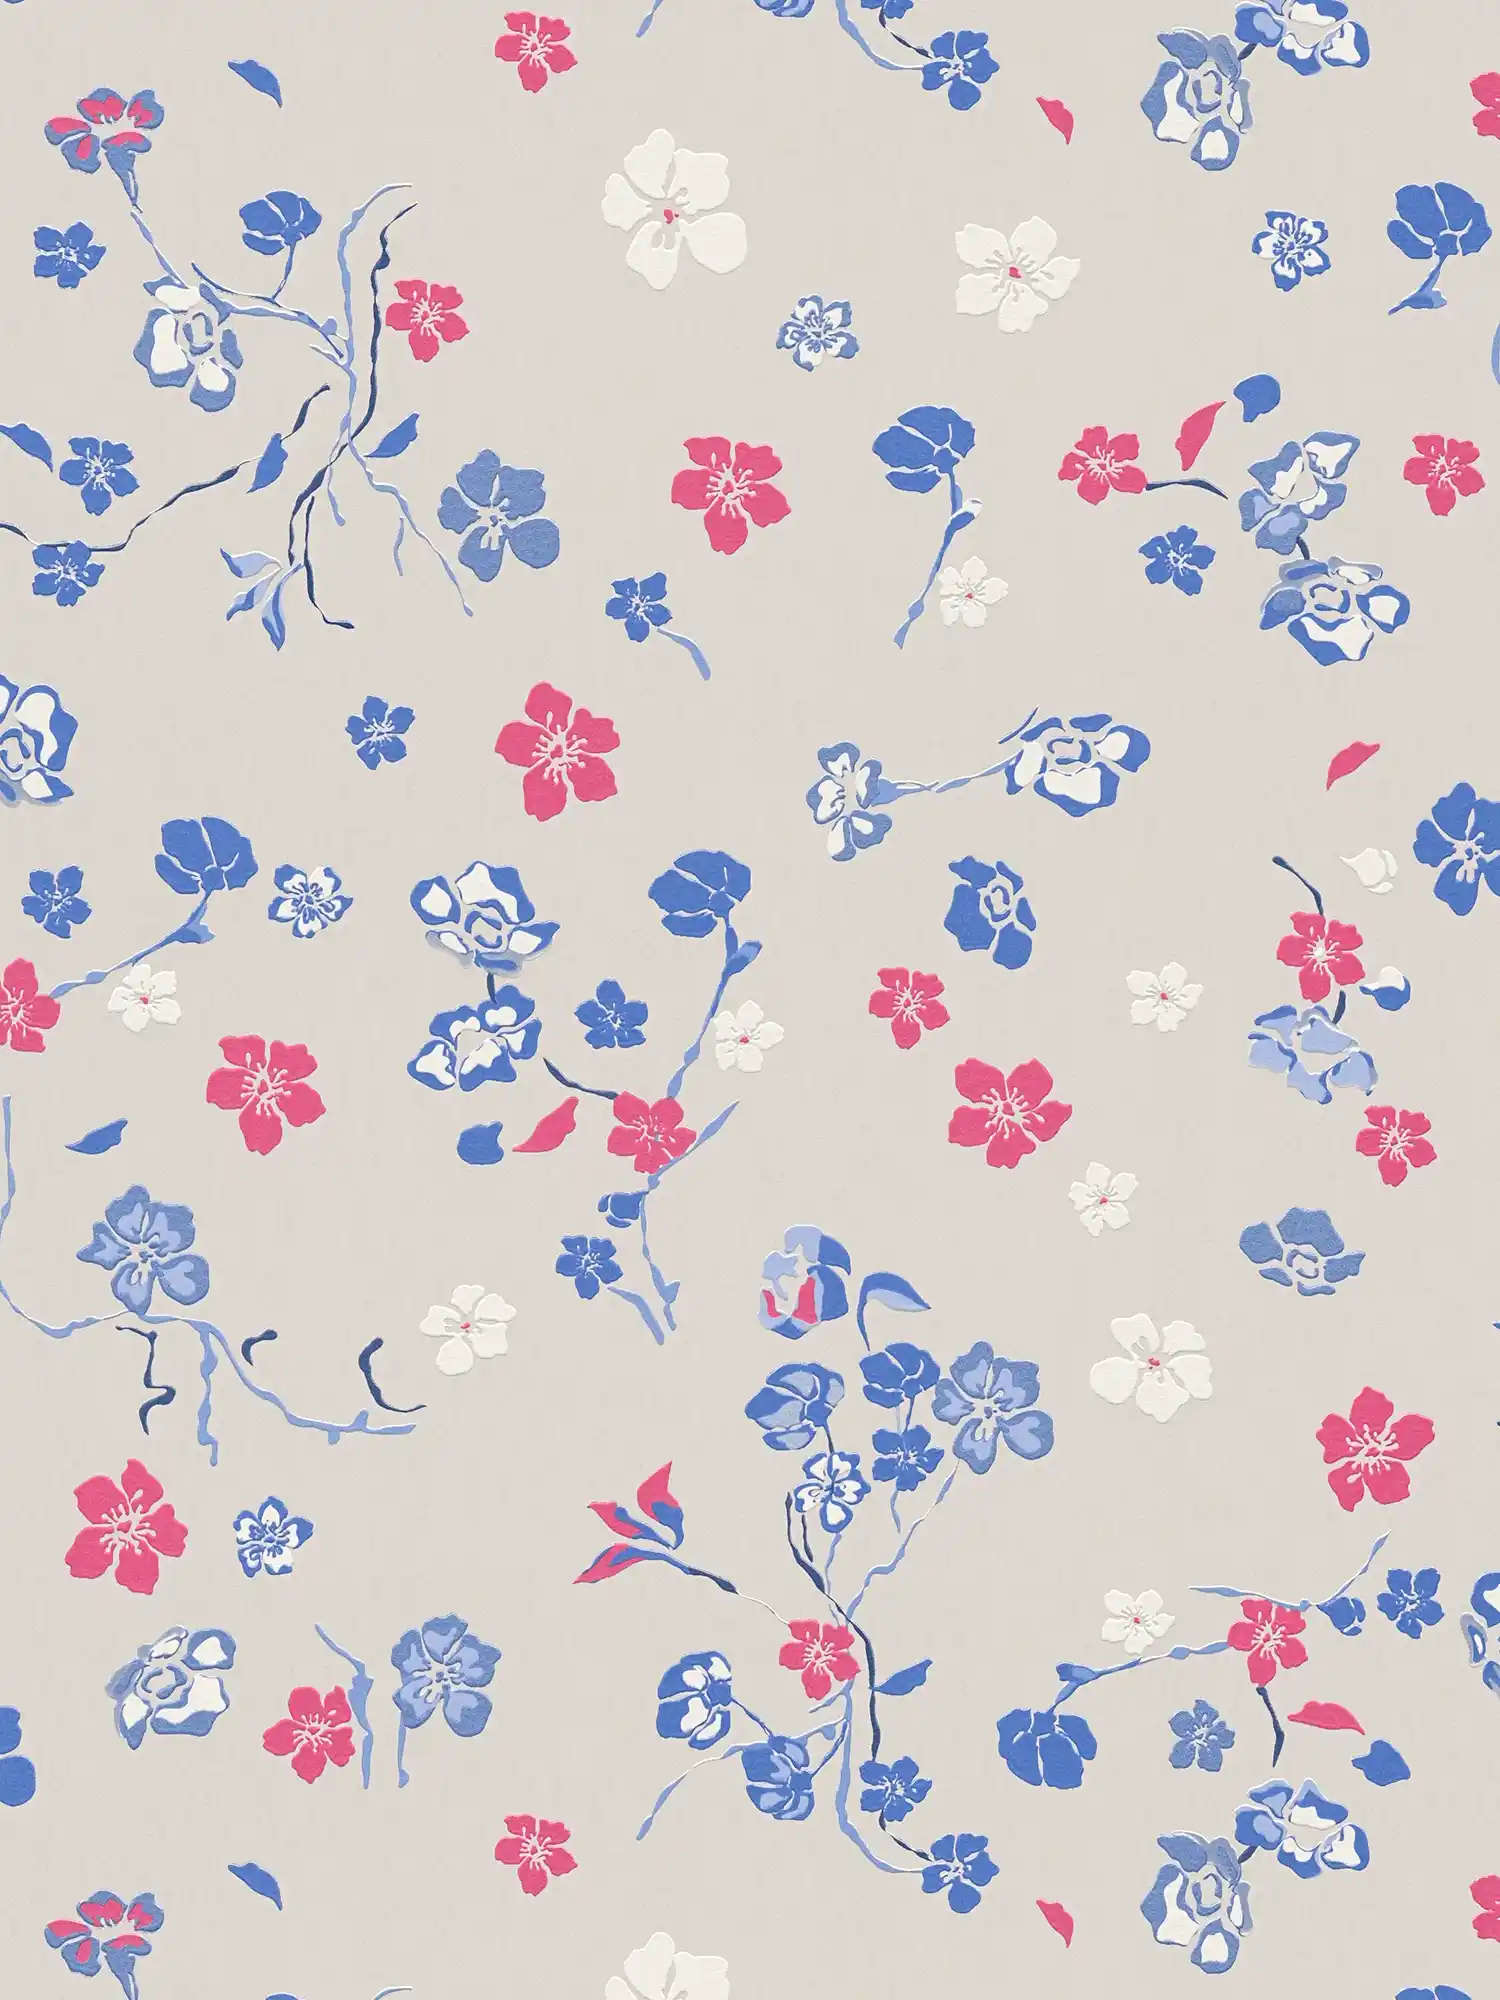 Non-woven wallpaper with playful floral pattern - light grey, blue, pink
